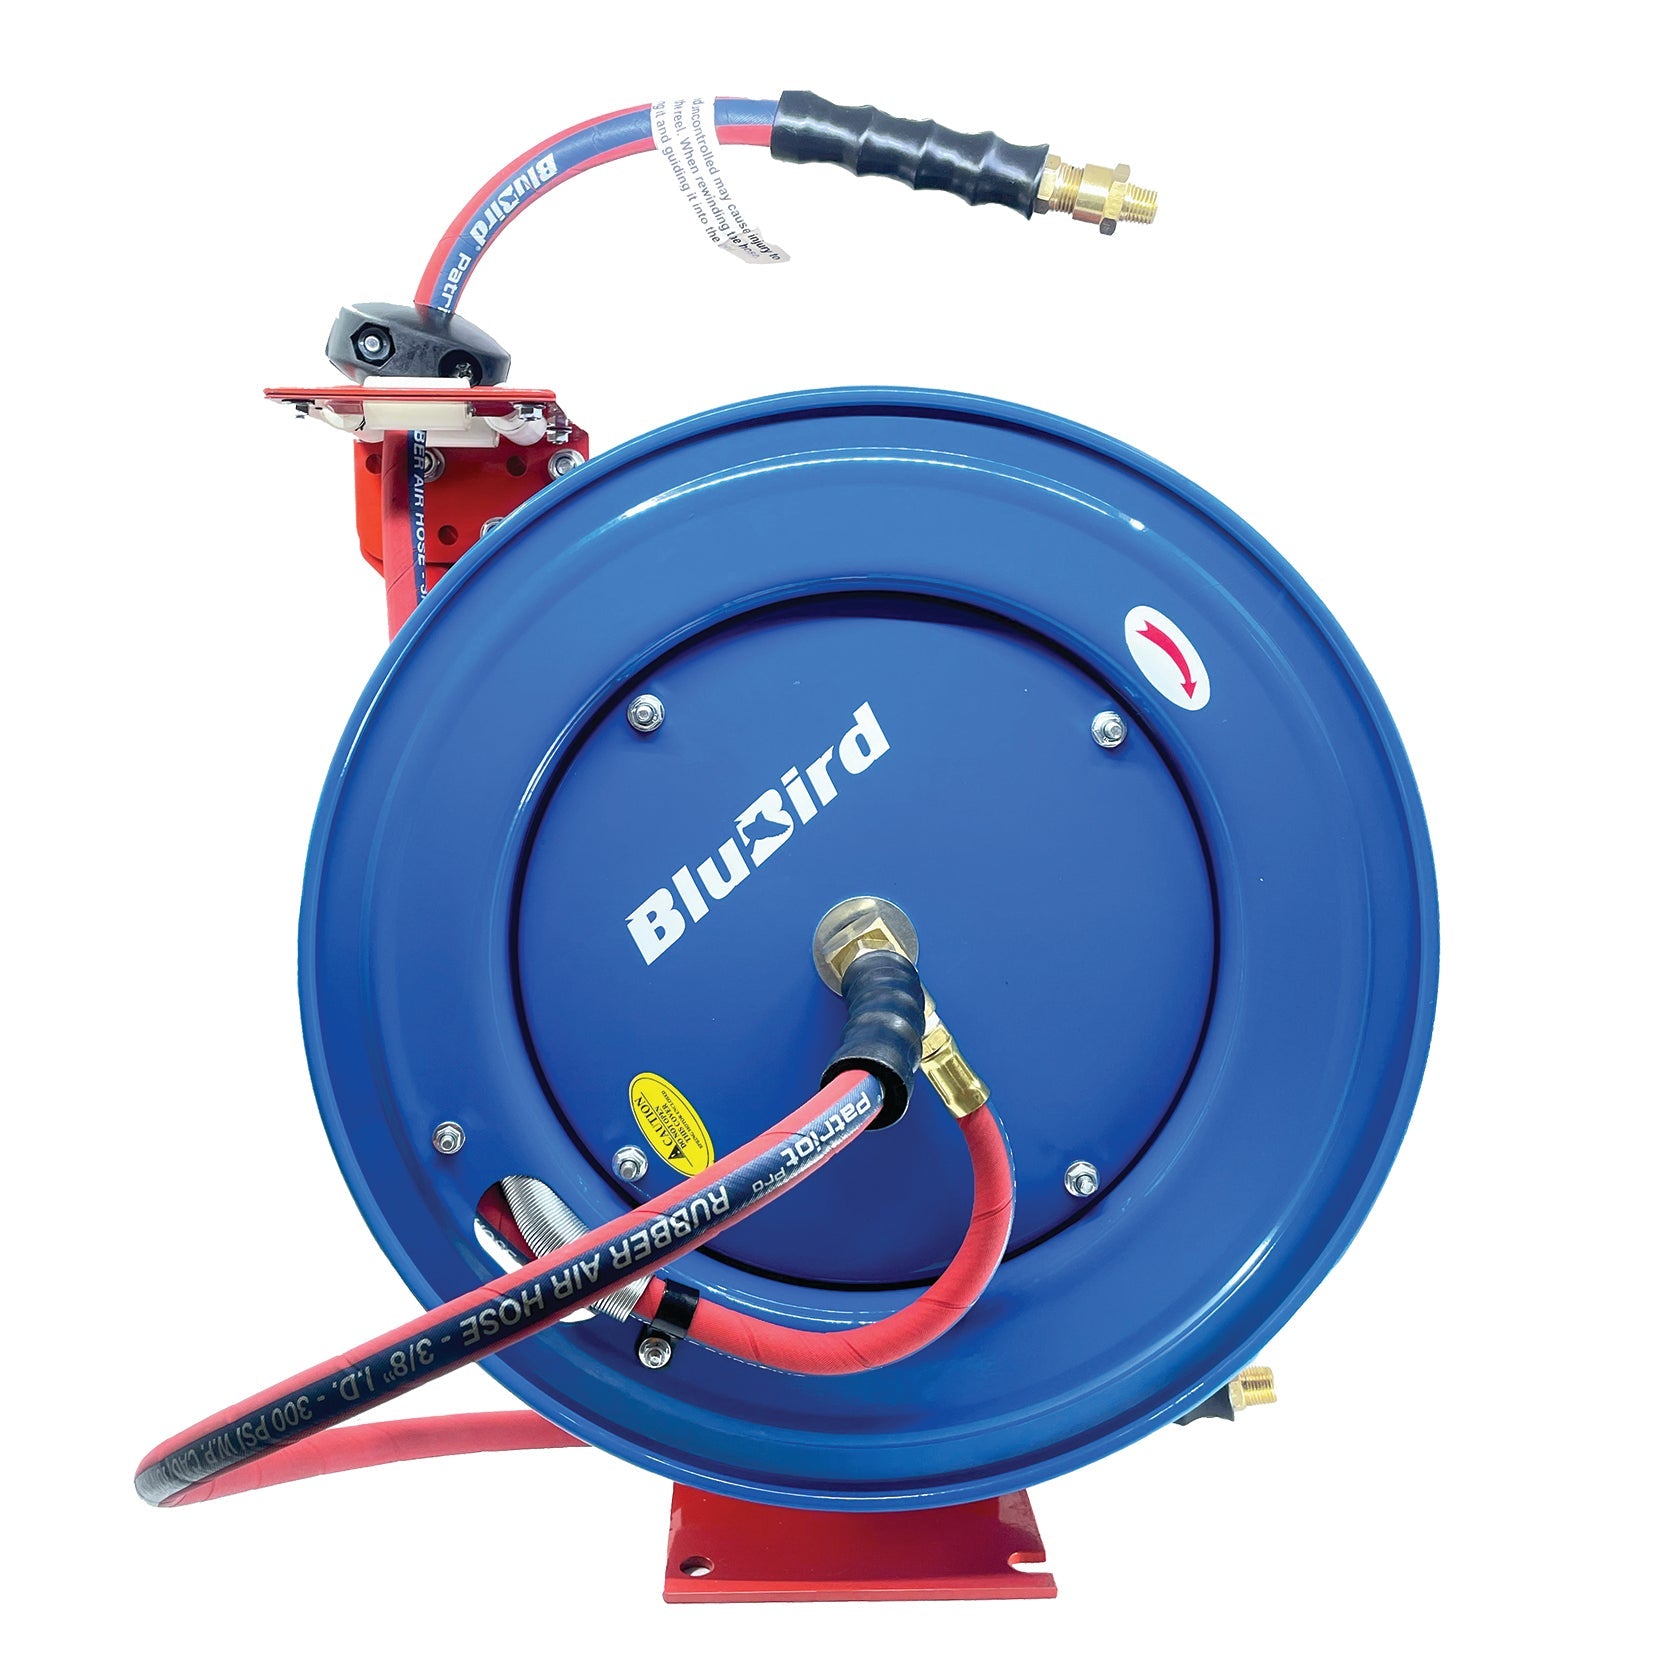 BluBird Patriot Pro Air Hose Reel 3/8 x 50' Retractable Heavy Duty Steel Construction with Rubber Hose 300 PSI